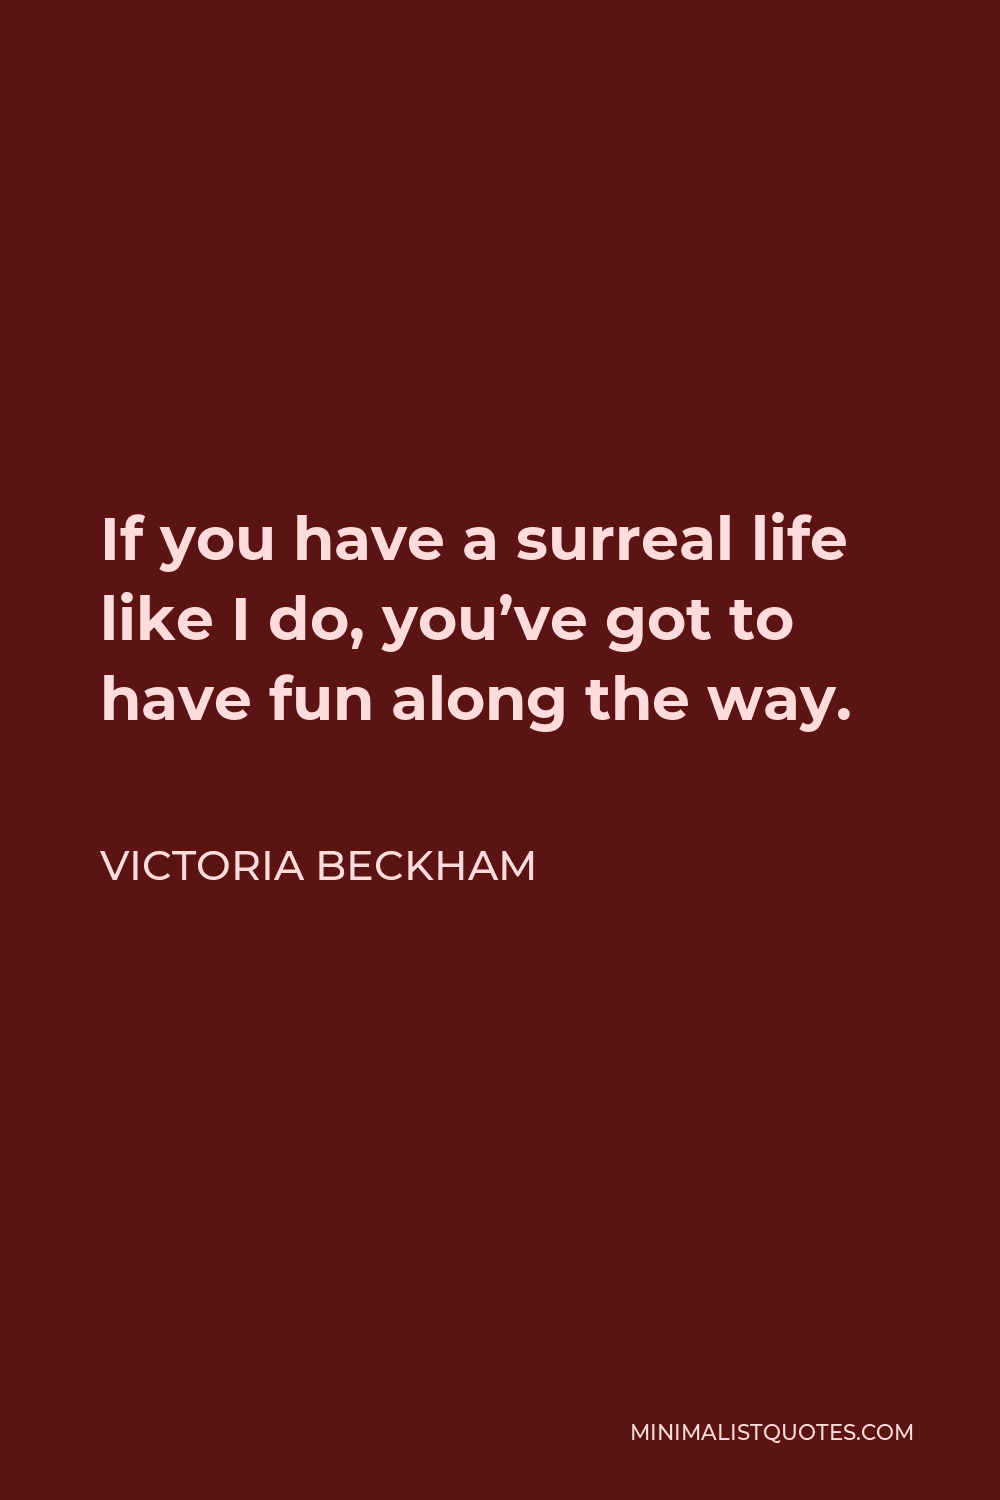 Victoria Beckham Quote - If you have a surreal life like I do, you’ve got to have fun along the way.